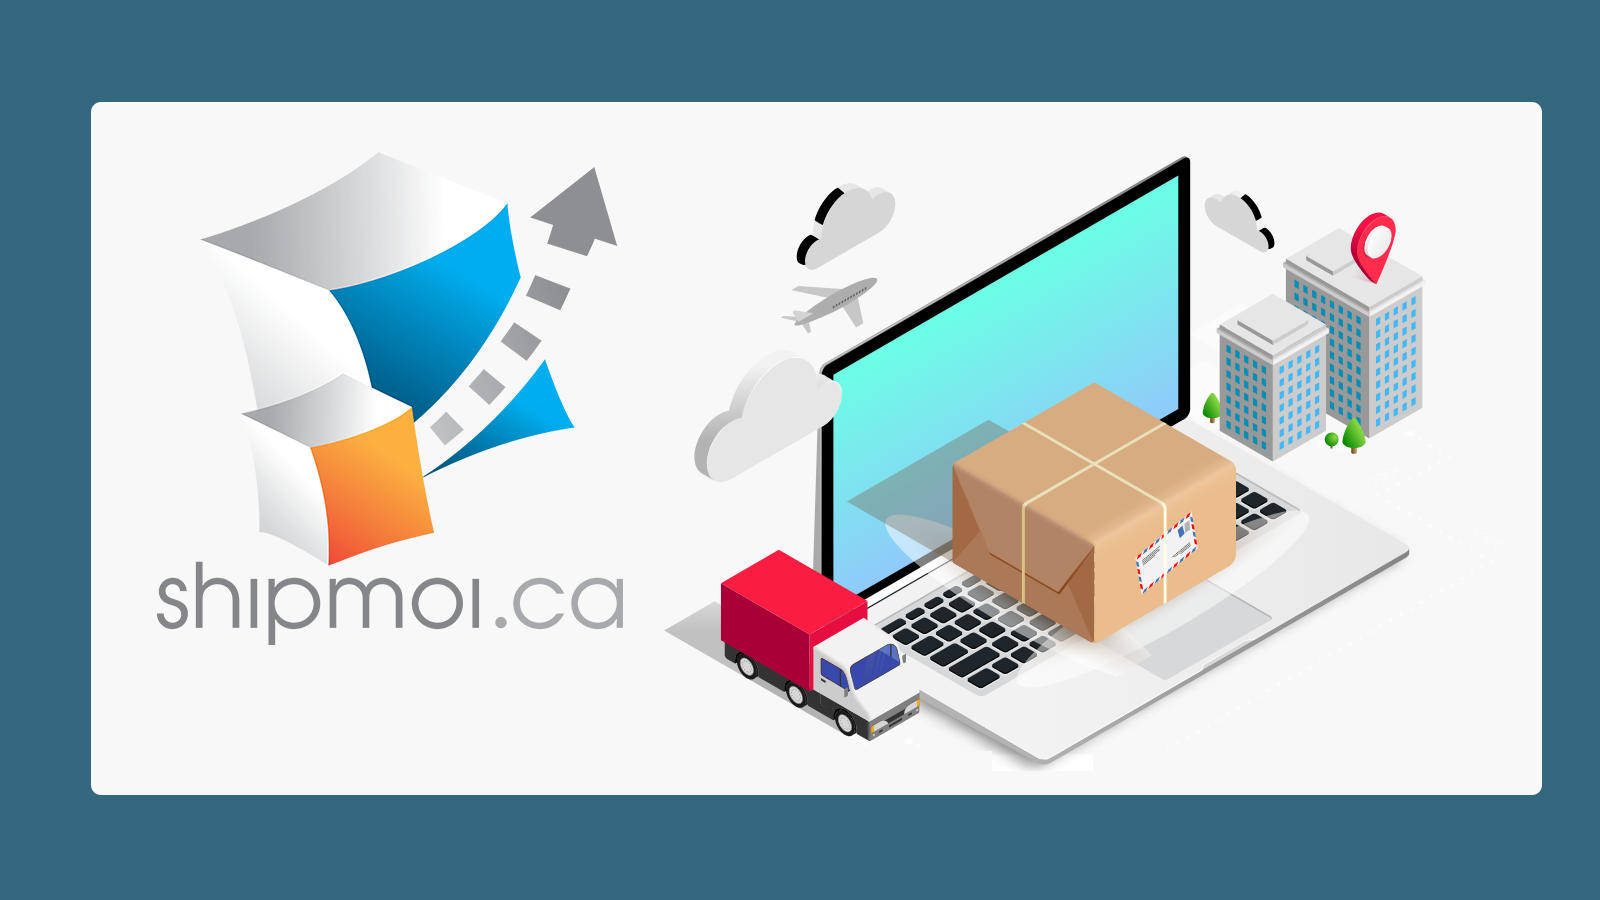  the Shipmoi.ca application connected to a Shopify store